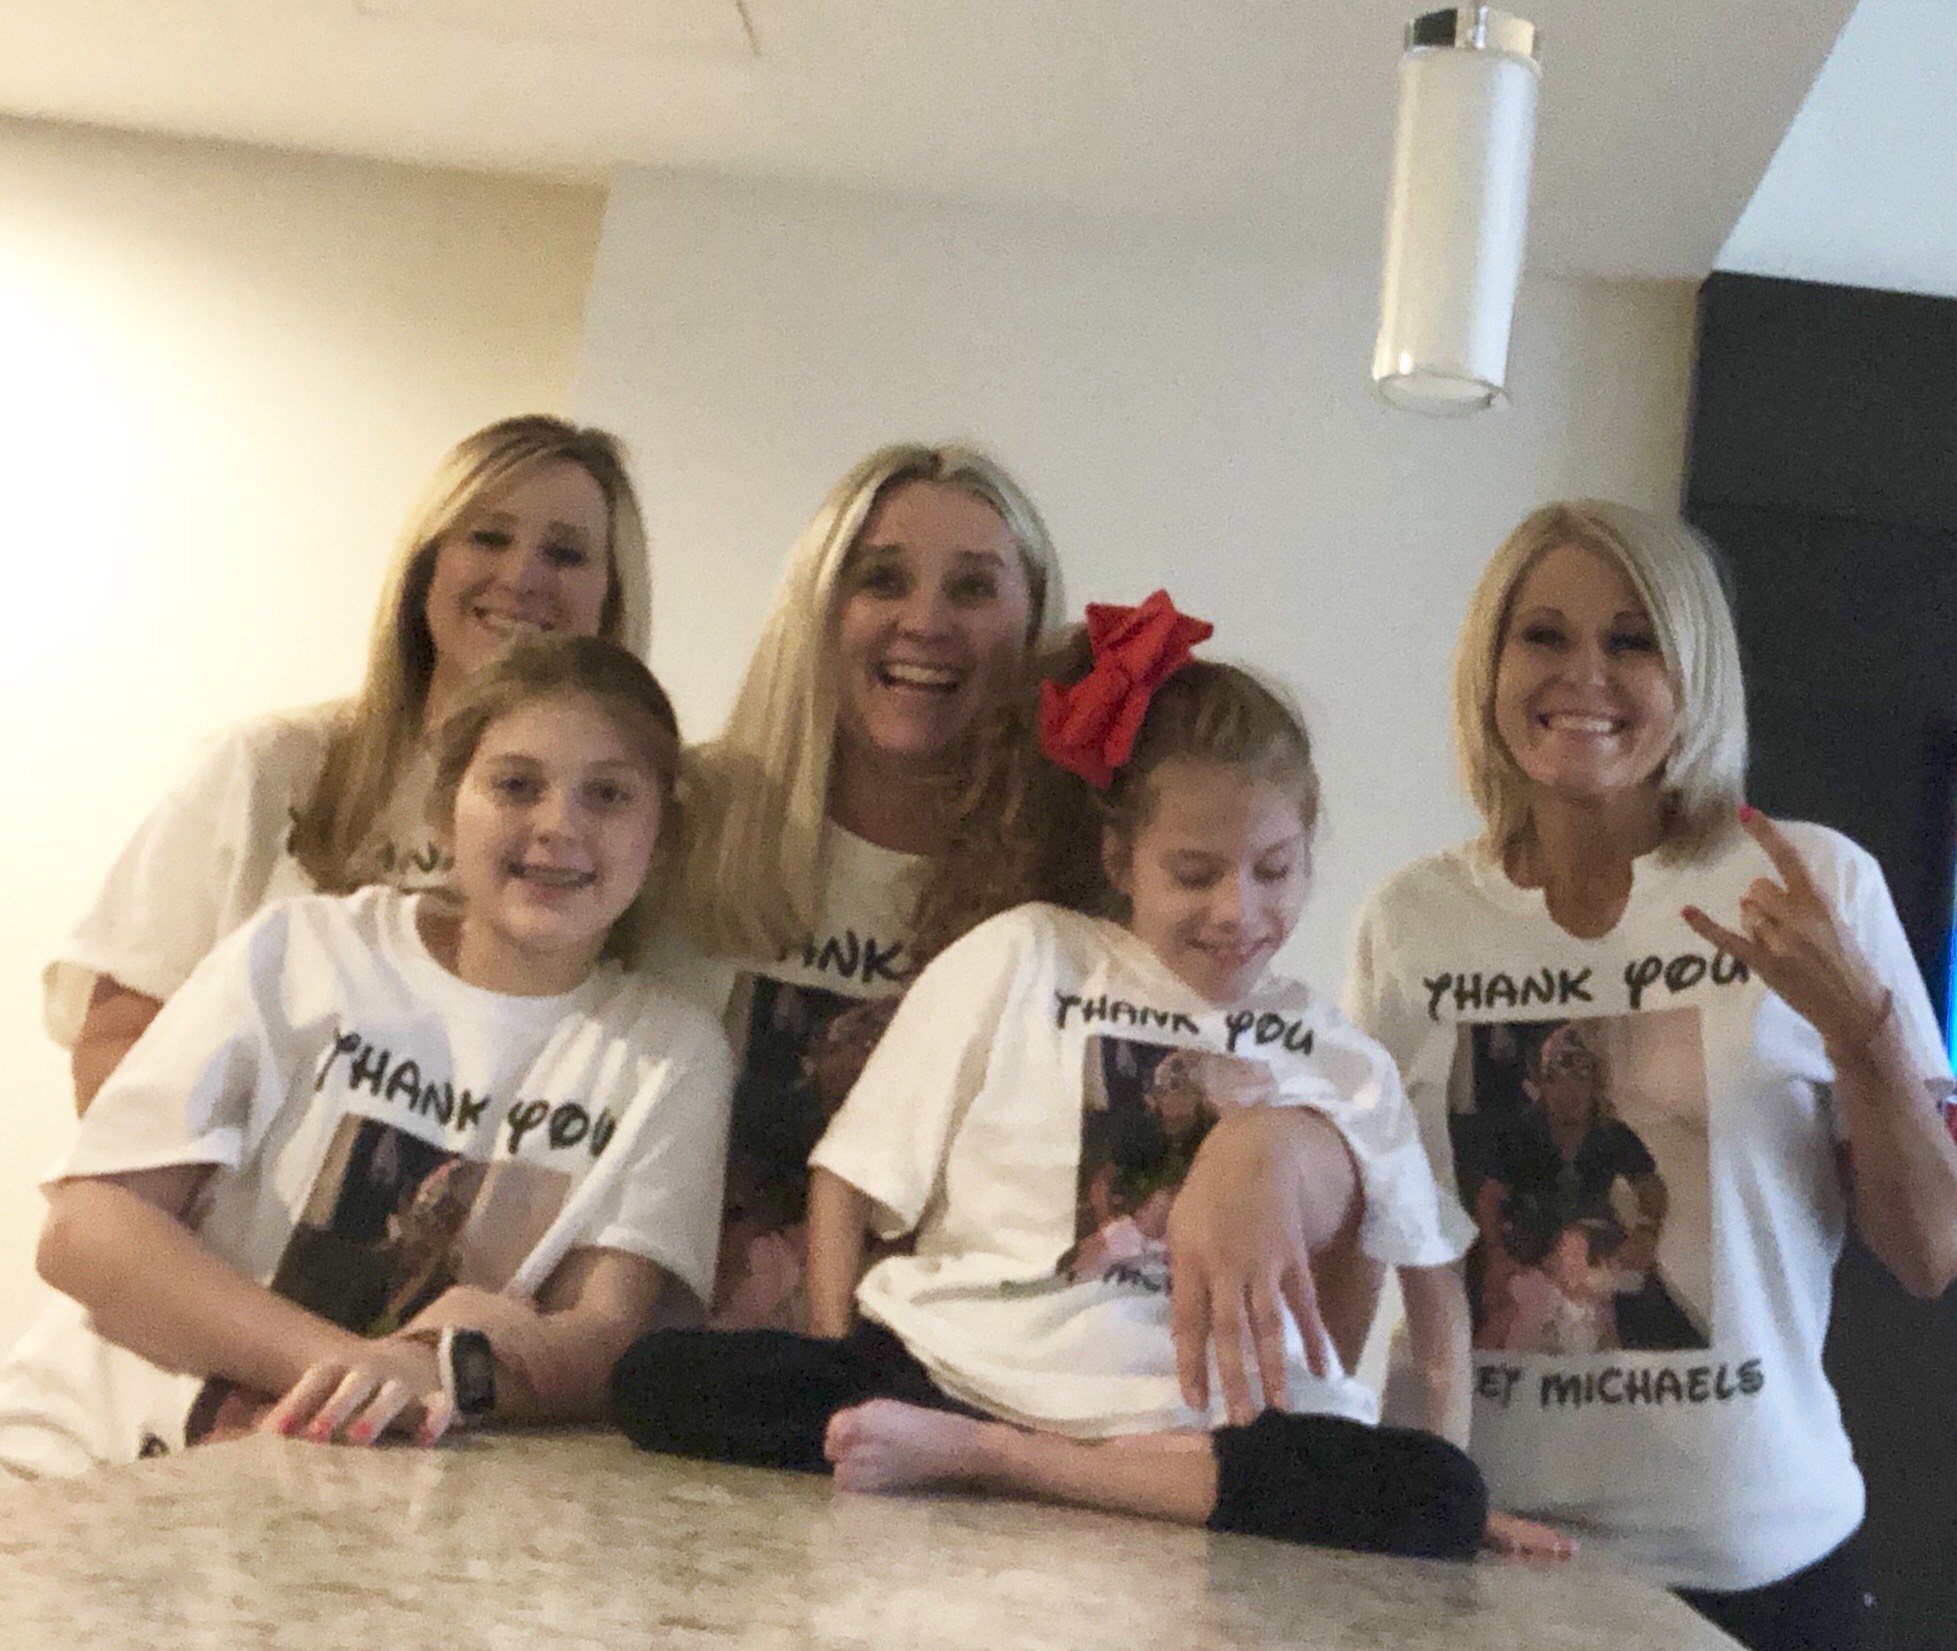 Community - Bret Michaels sends Addy and her Family to Disneyland.